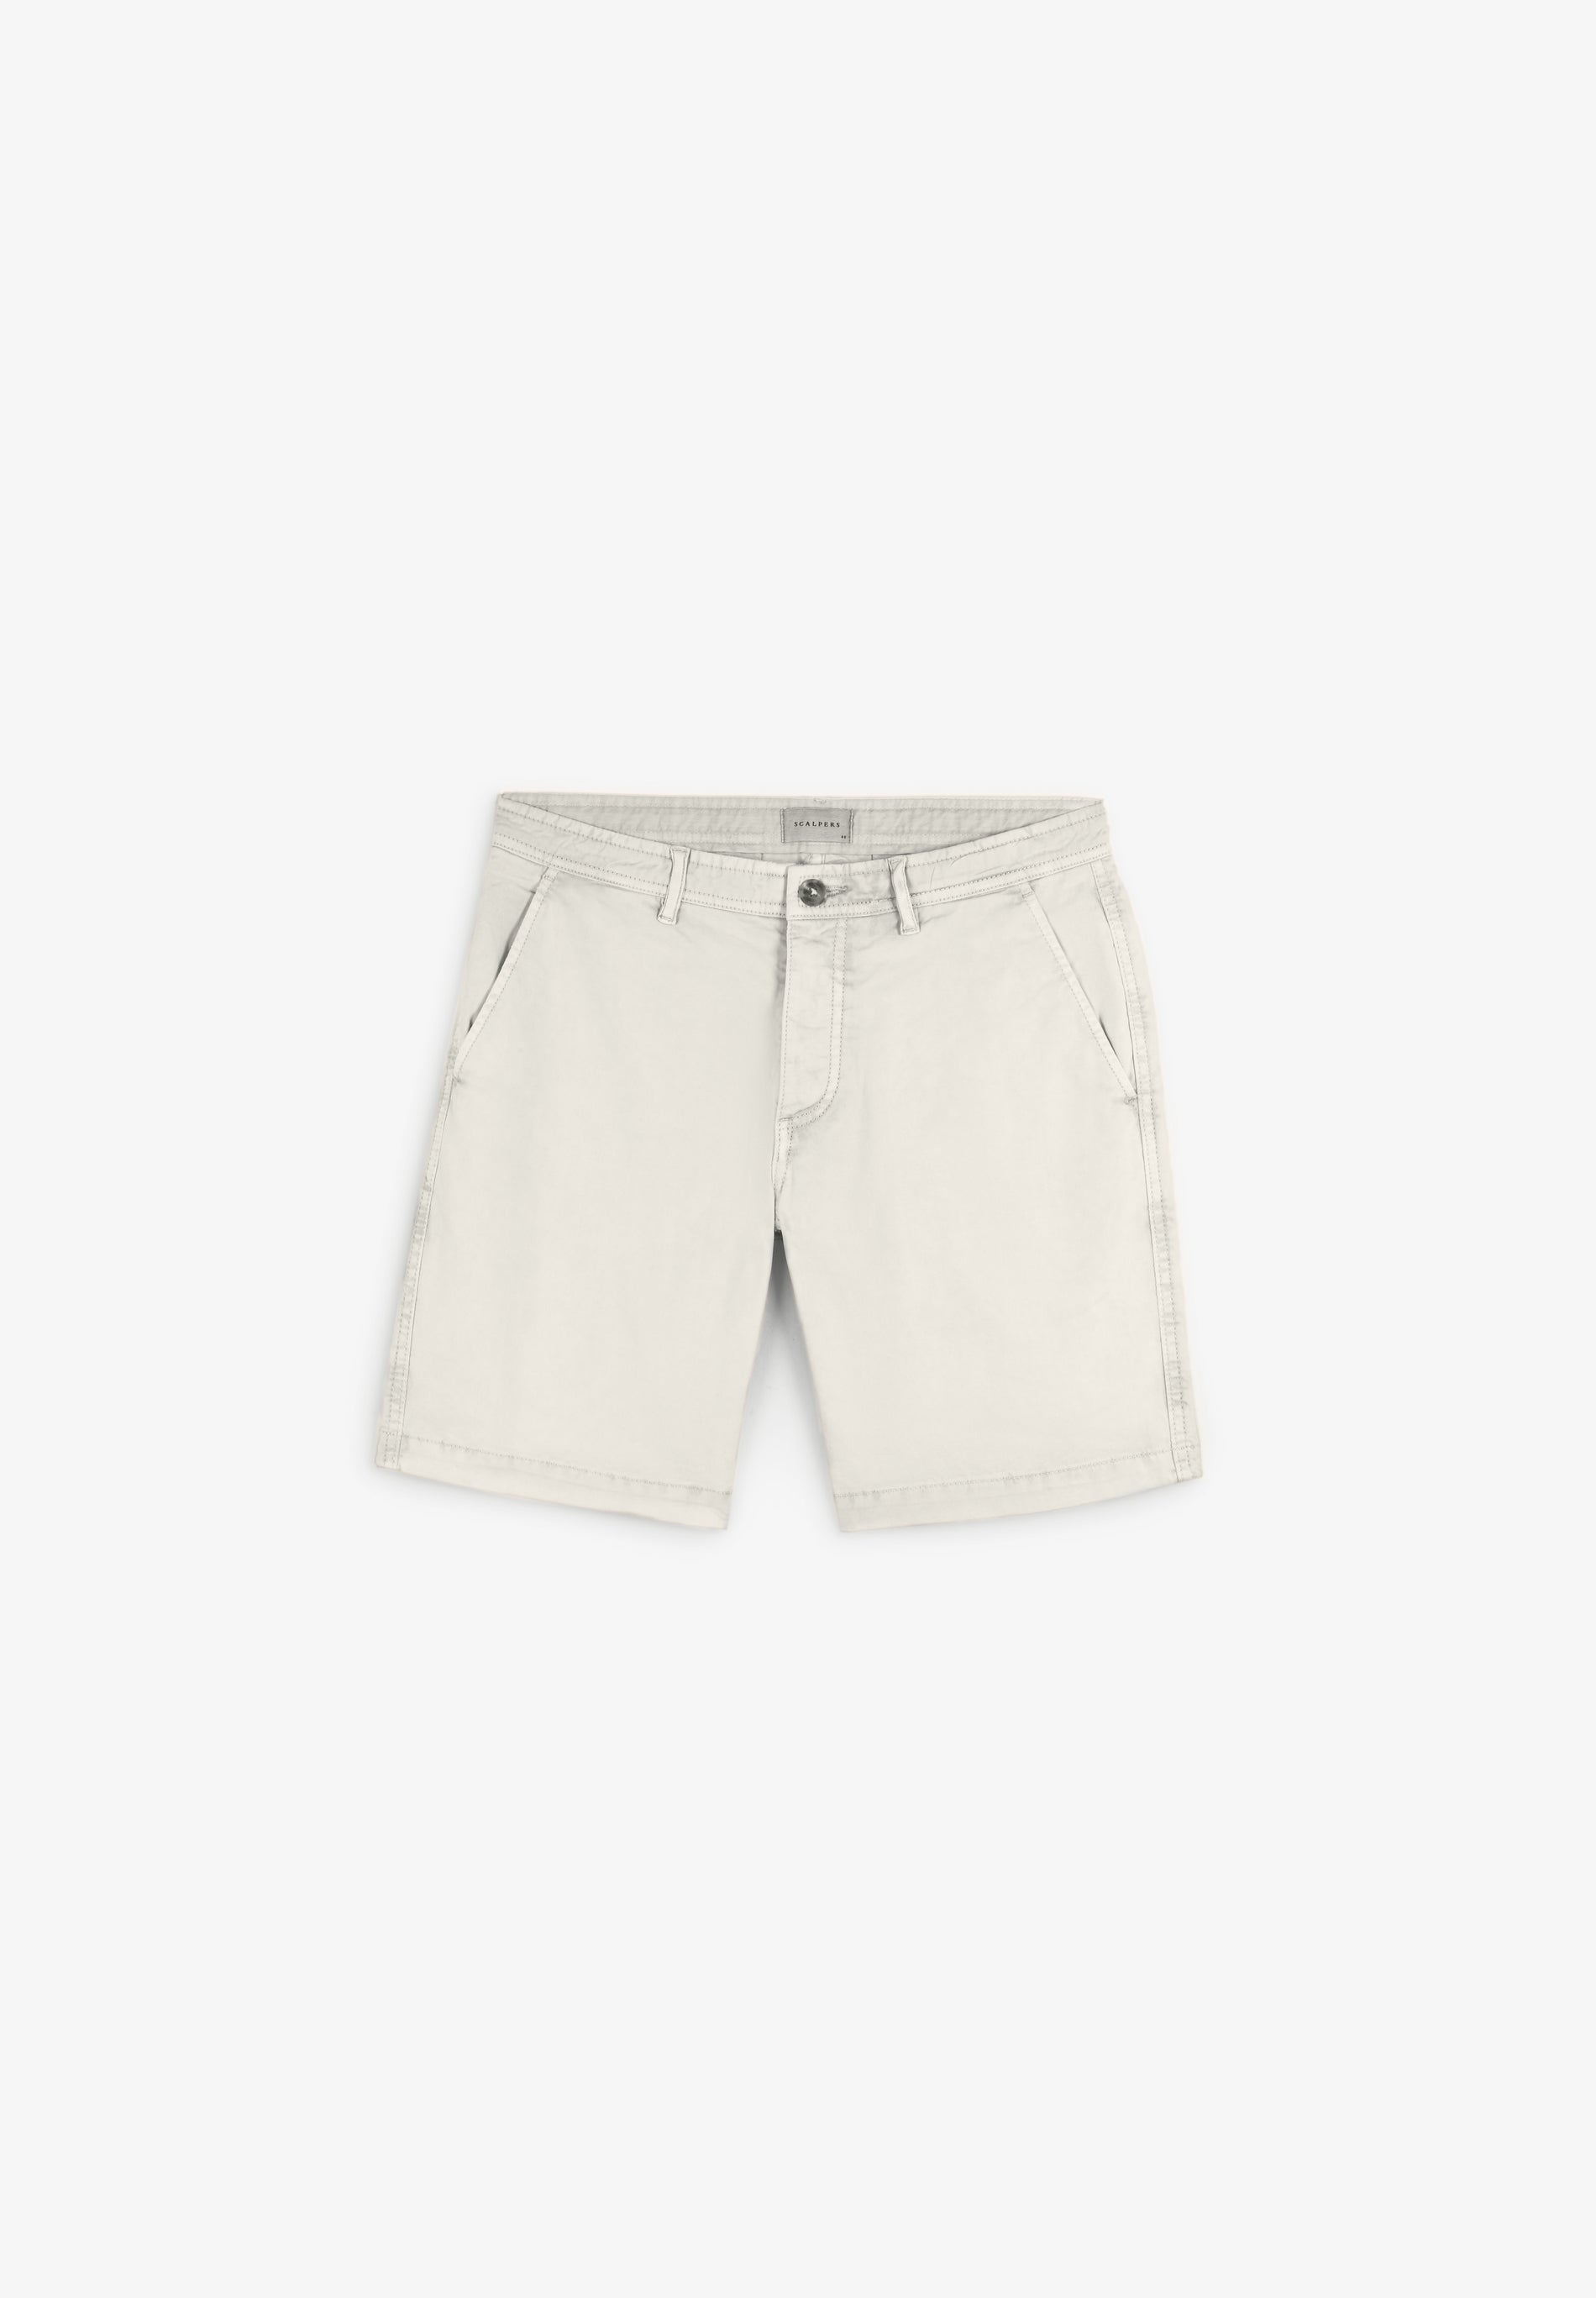 OUTFITTER SHORTS